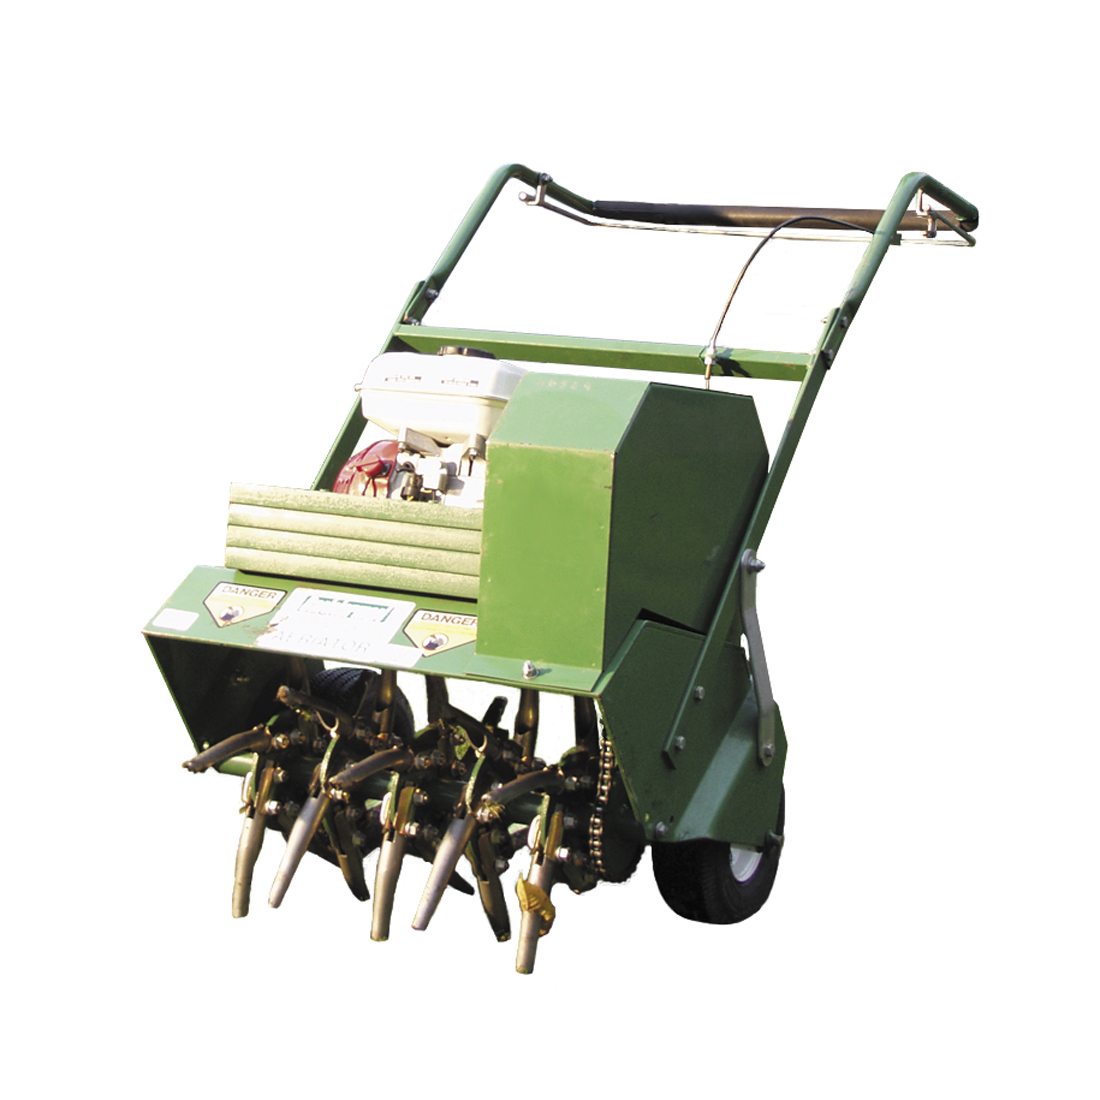 Hollow Powered Lawn Aerator